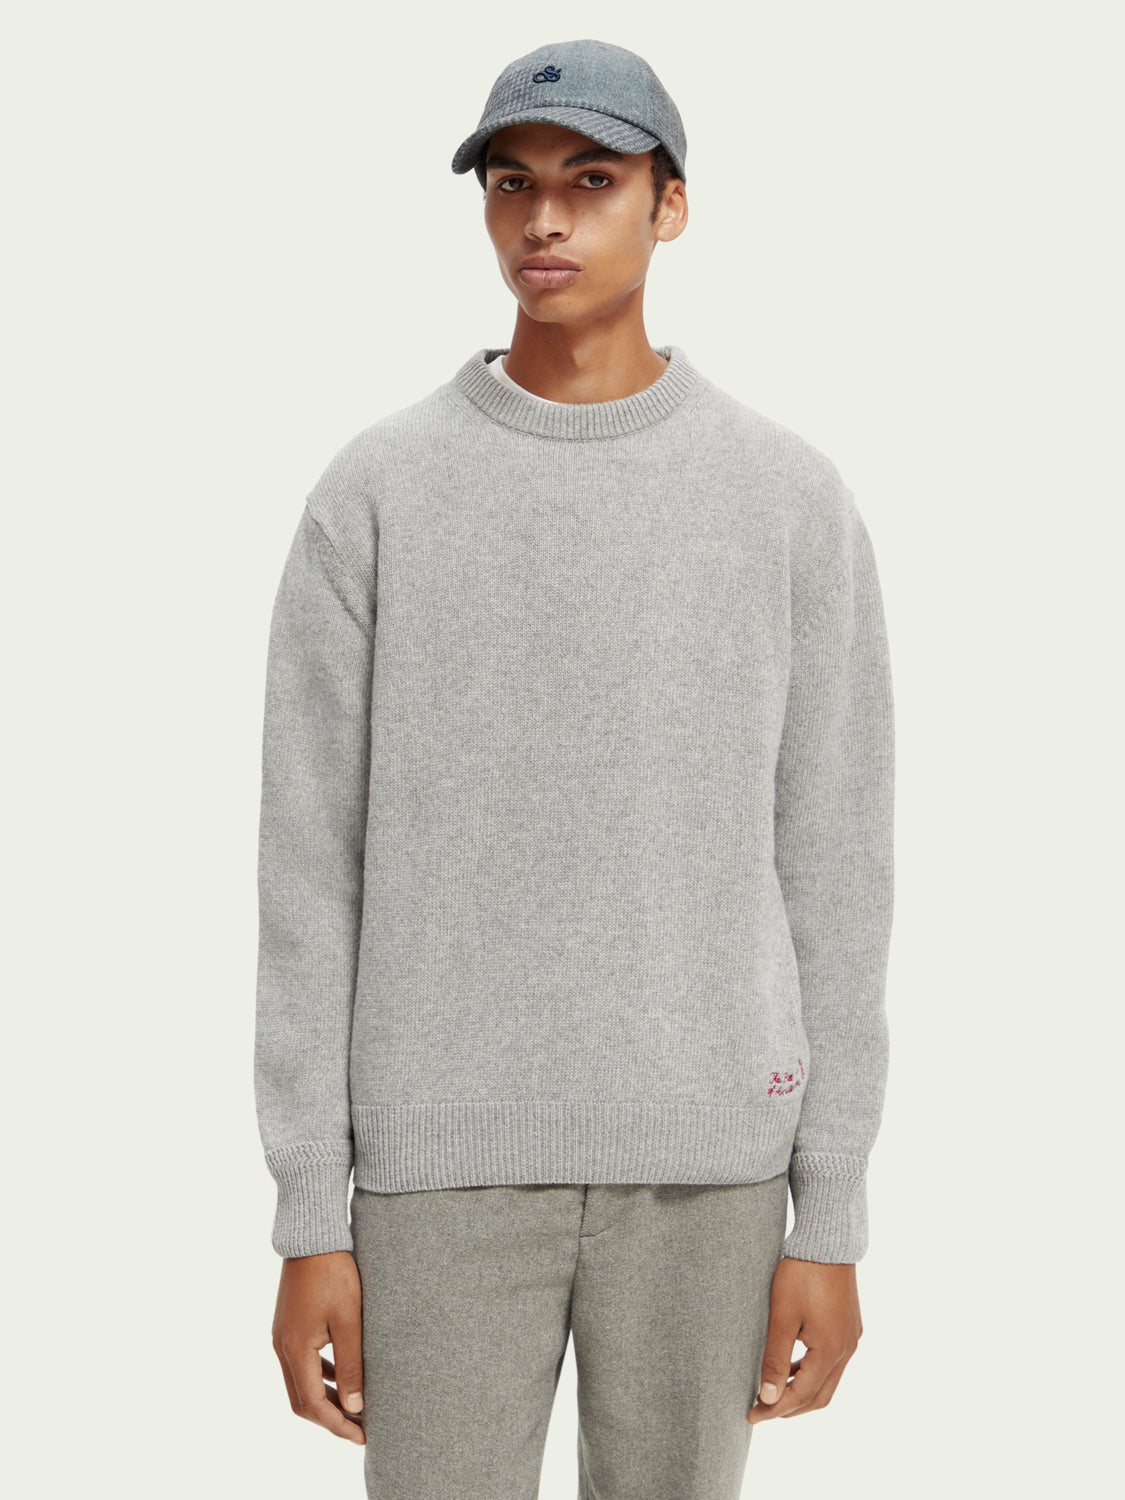 Grey relaxed fit wool sweater